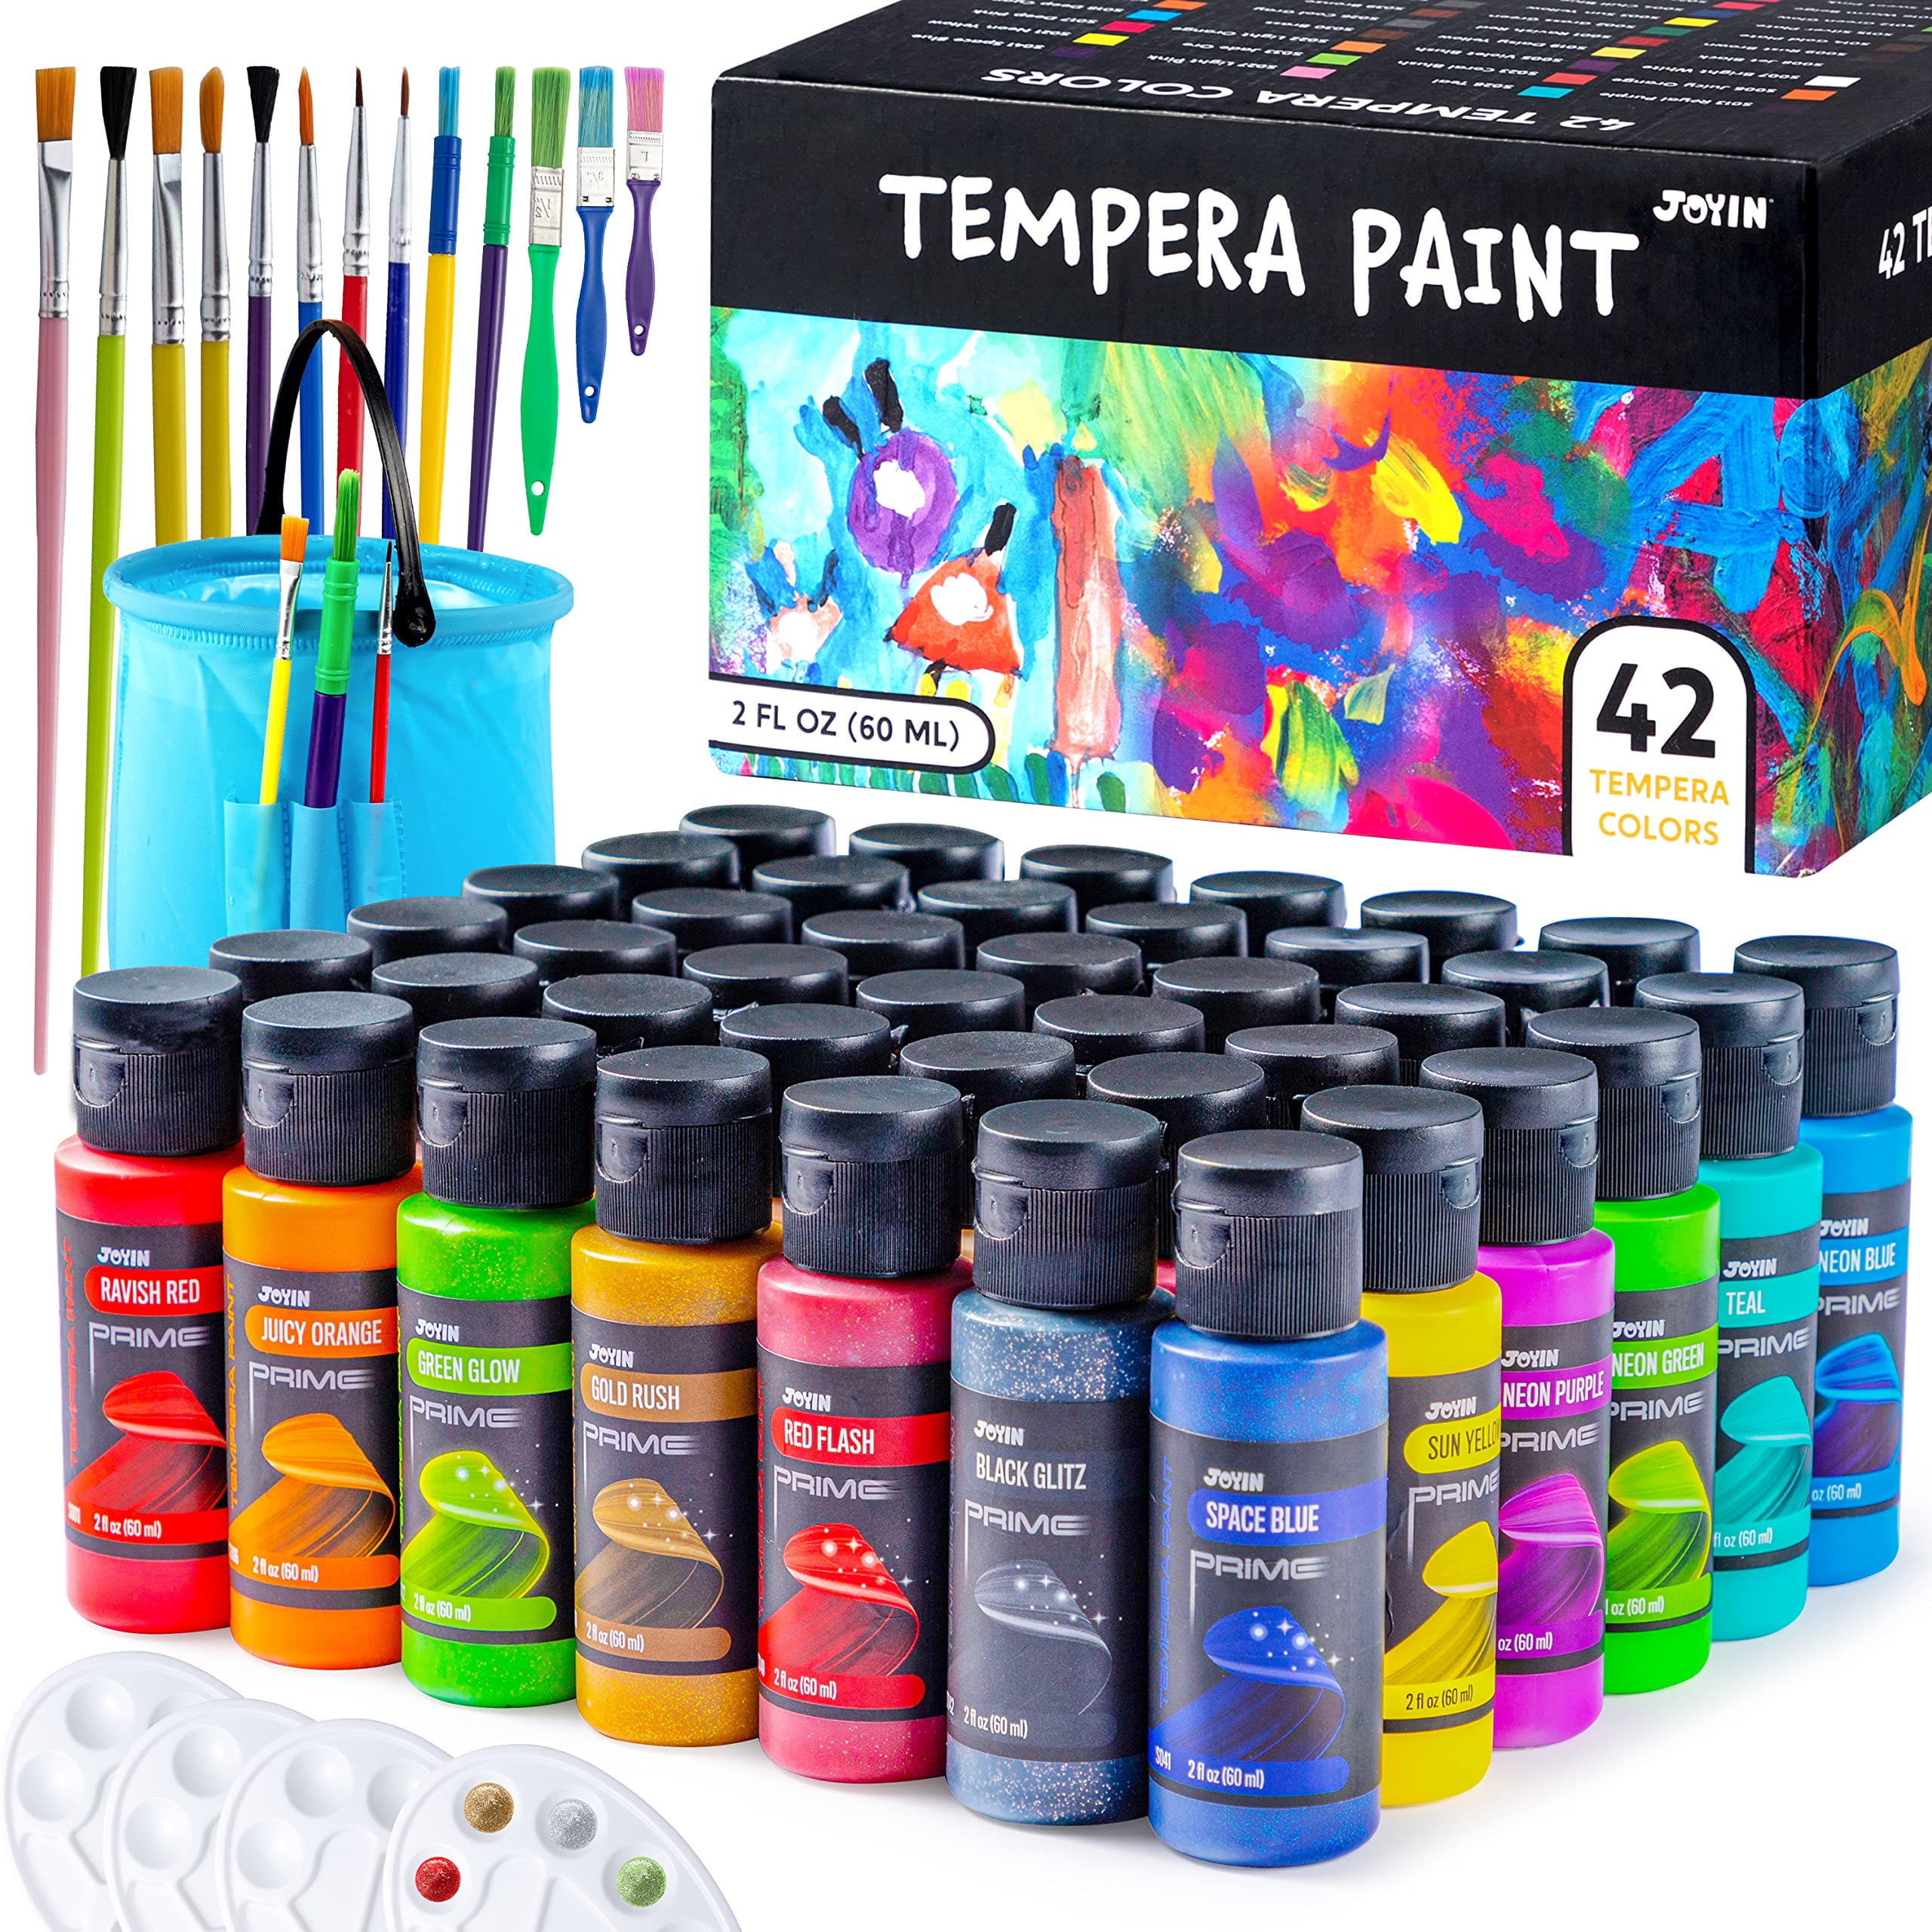 Playkidiz Washable Tempera Paints Set of 12 4 oz Bottles for Children,  Non-Toxic Washable Acrylic Paint, Kid Friendly, Kid Safe Paint Set,  Includes Variety of Brushes, Color, Craft, Create and Party.â€ 